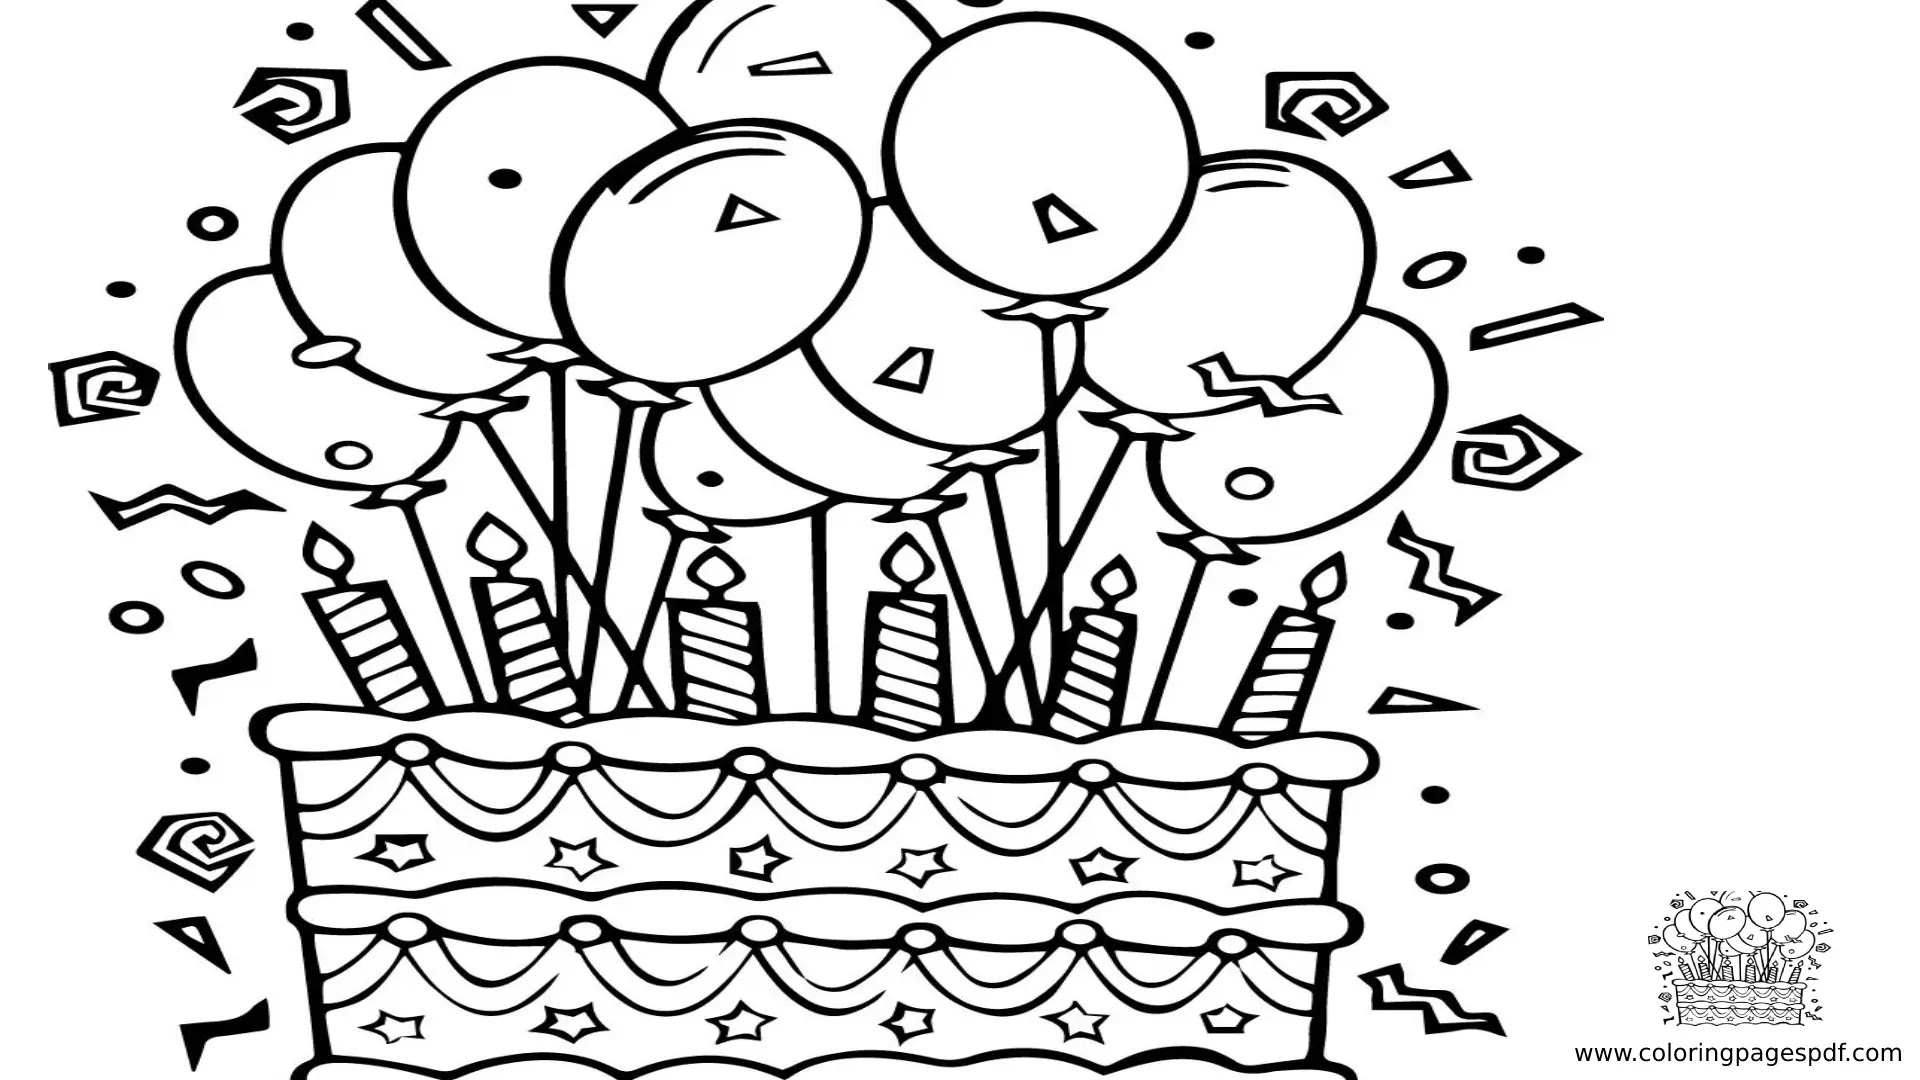 Coloring Pages Of A Birthday Cake With Balloons